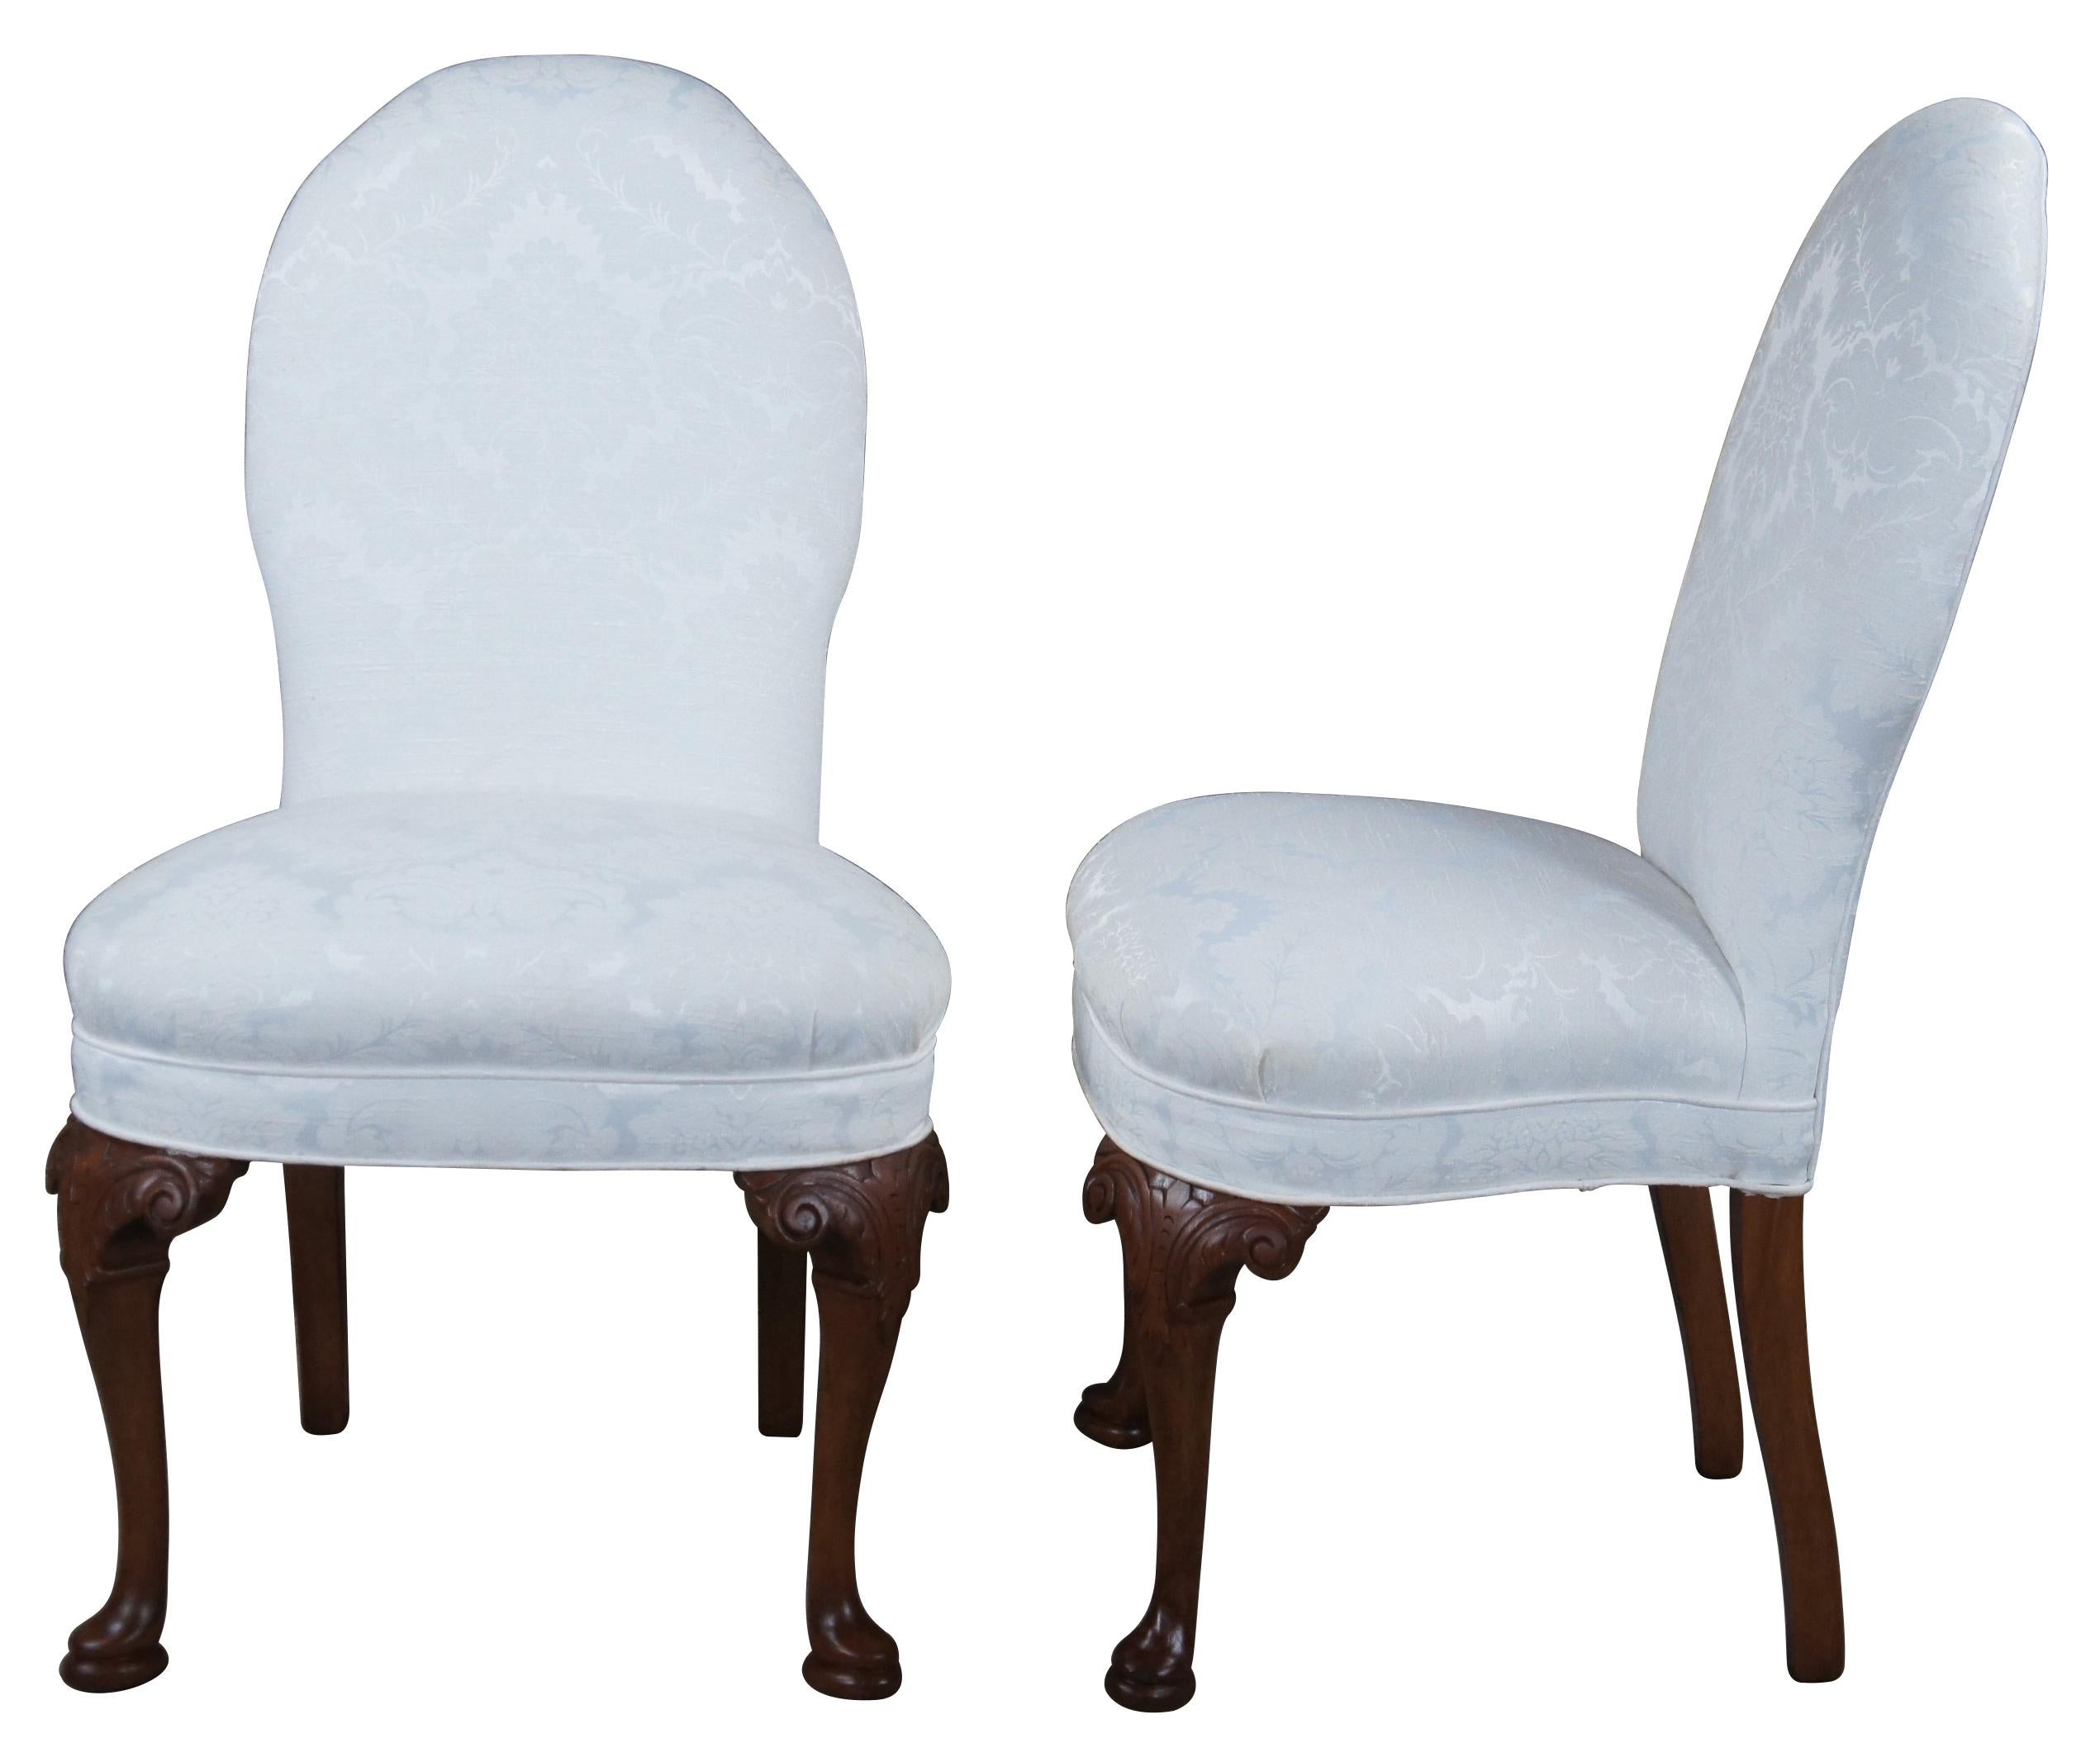 Beautiful pair of Queen Anne style side chairs. Reminiscent of the classic spoon back chairs from the Victorian era. Made from mahogany with acanthus carved and scrolled knees leading to cabriole legs and pad feet. The chairs are upholstered in a